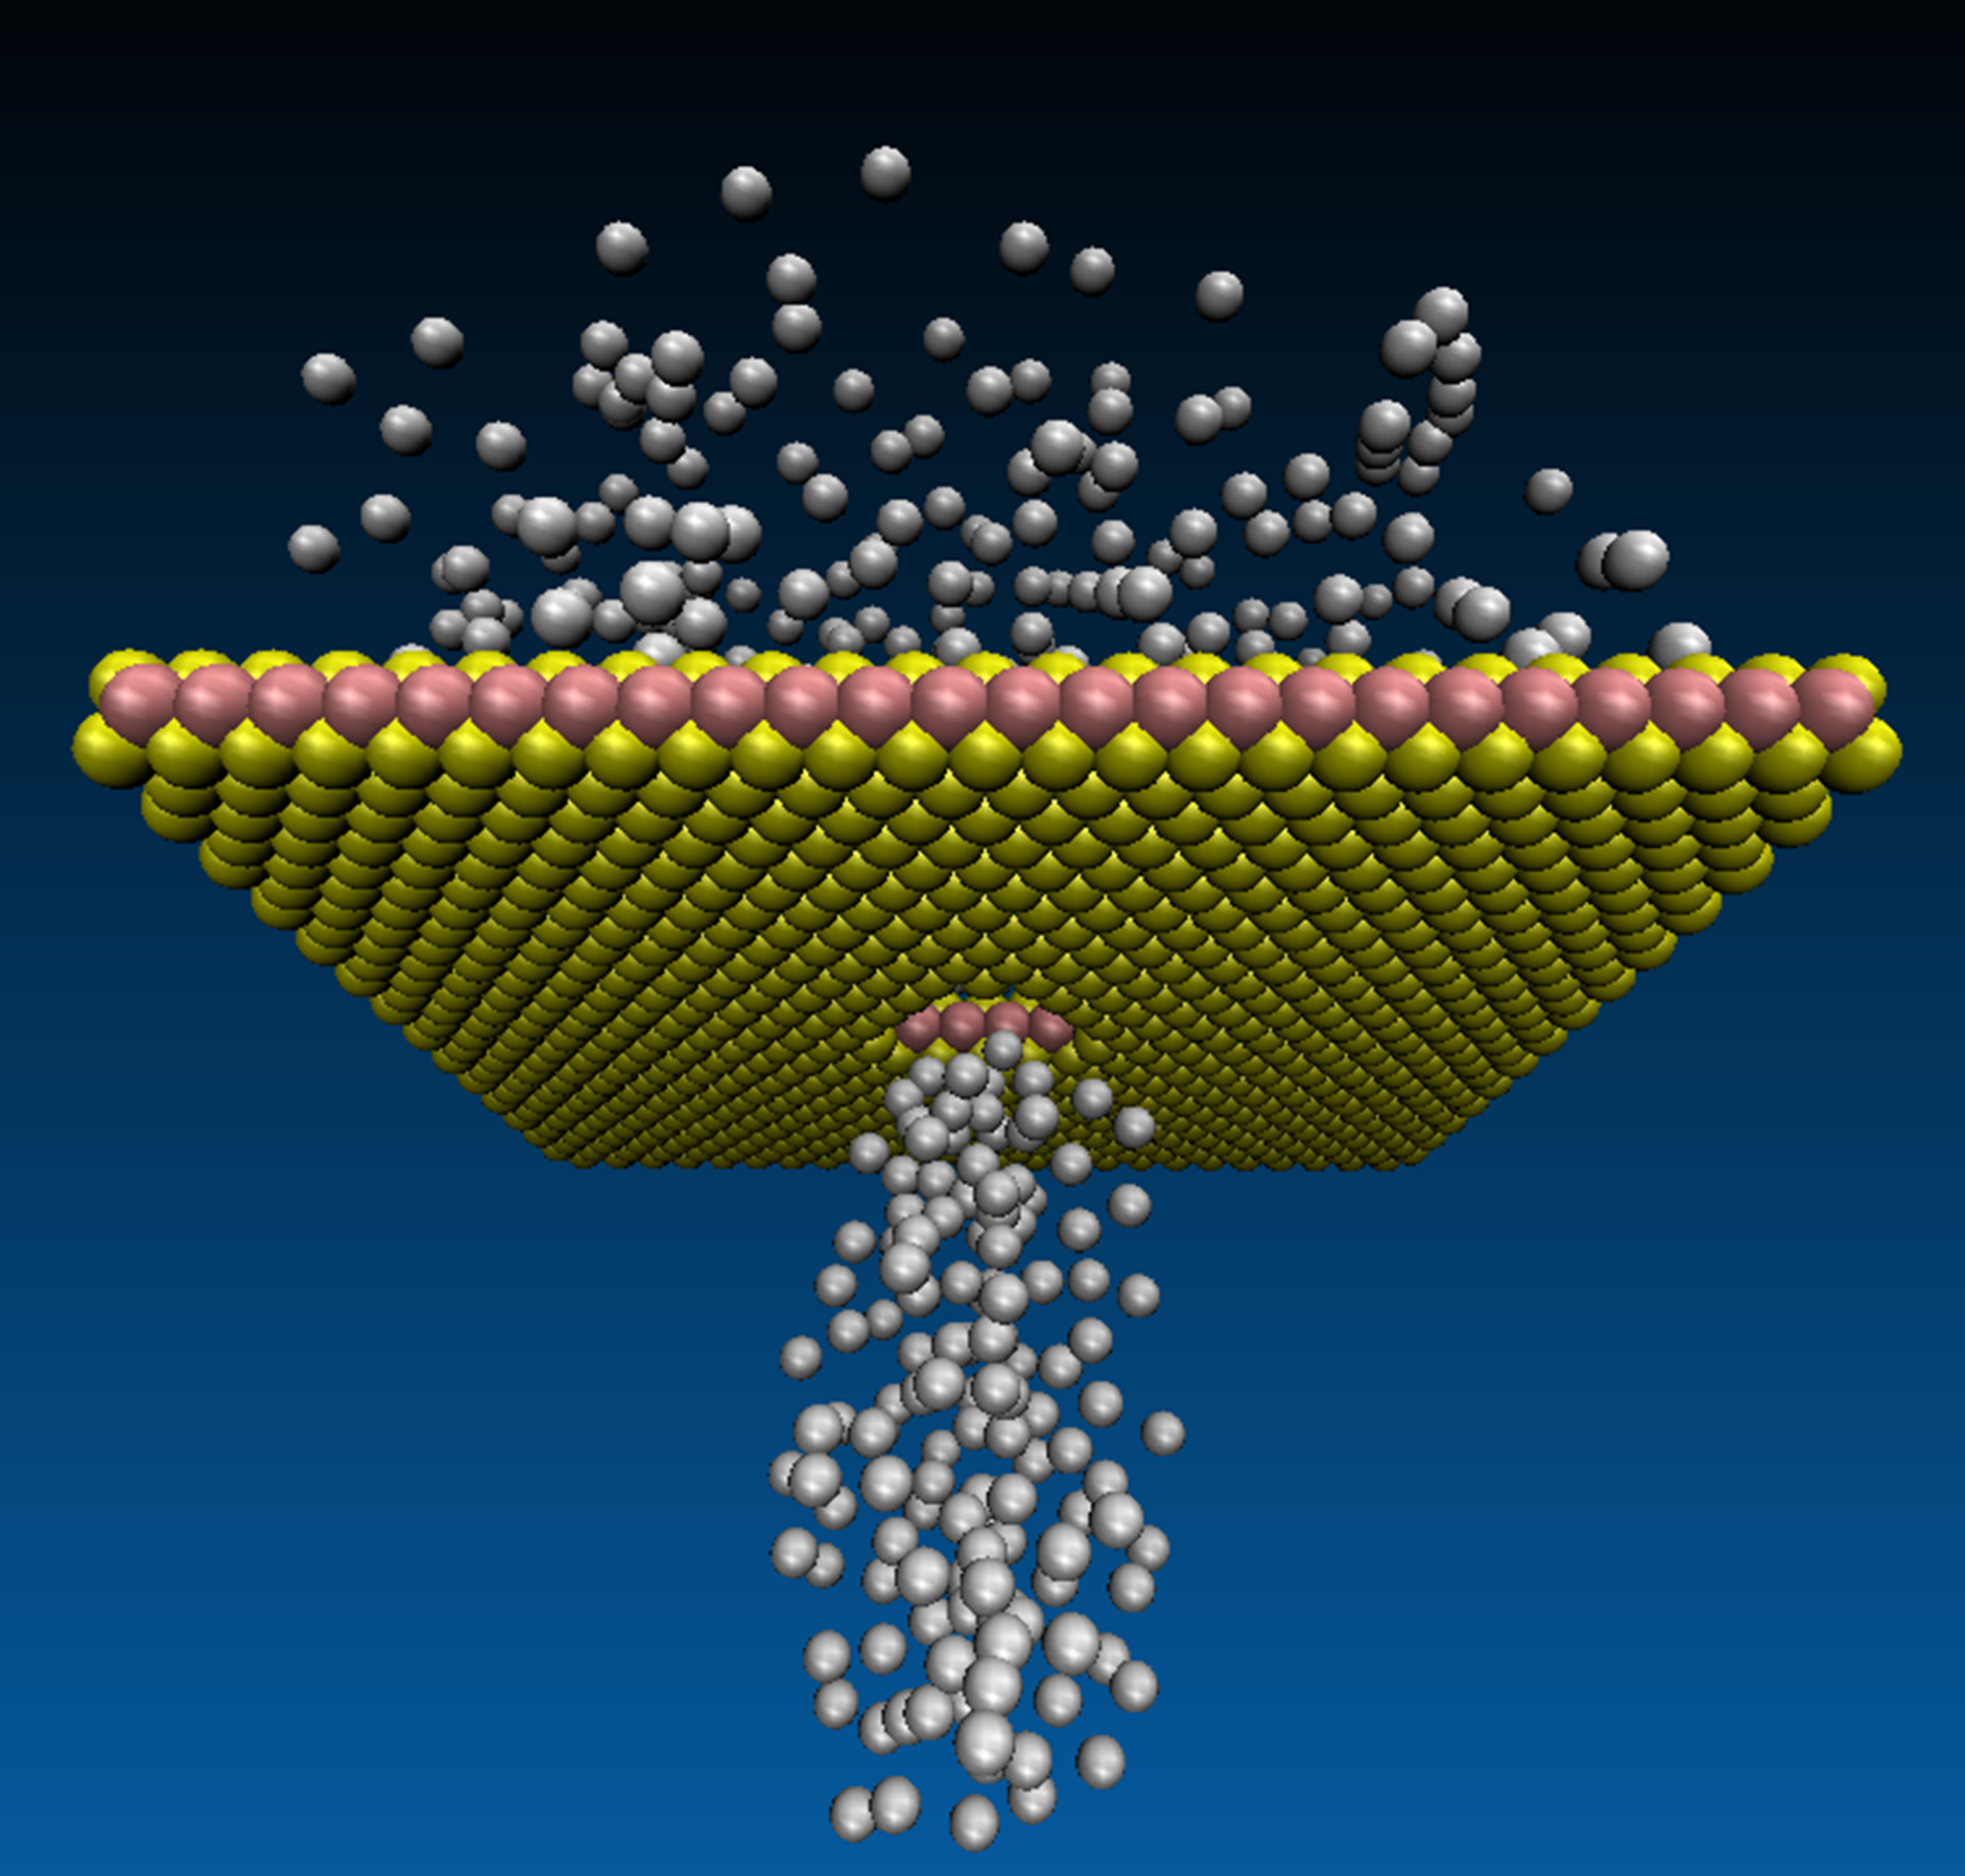 a diagram showing how the atomic pores filter atomic gas